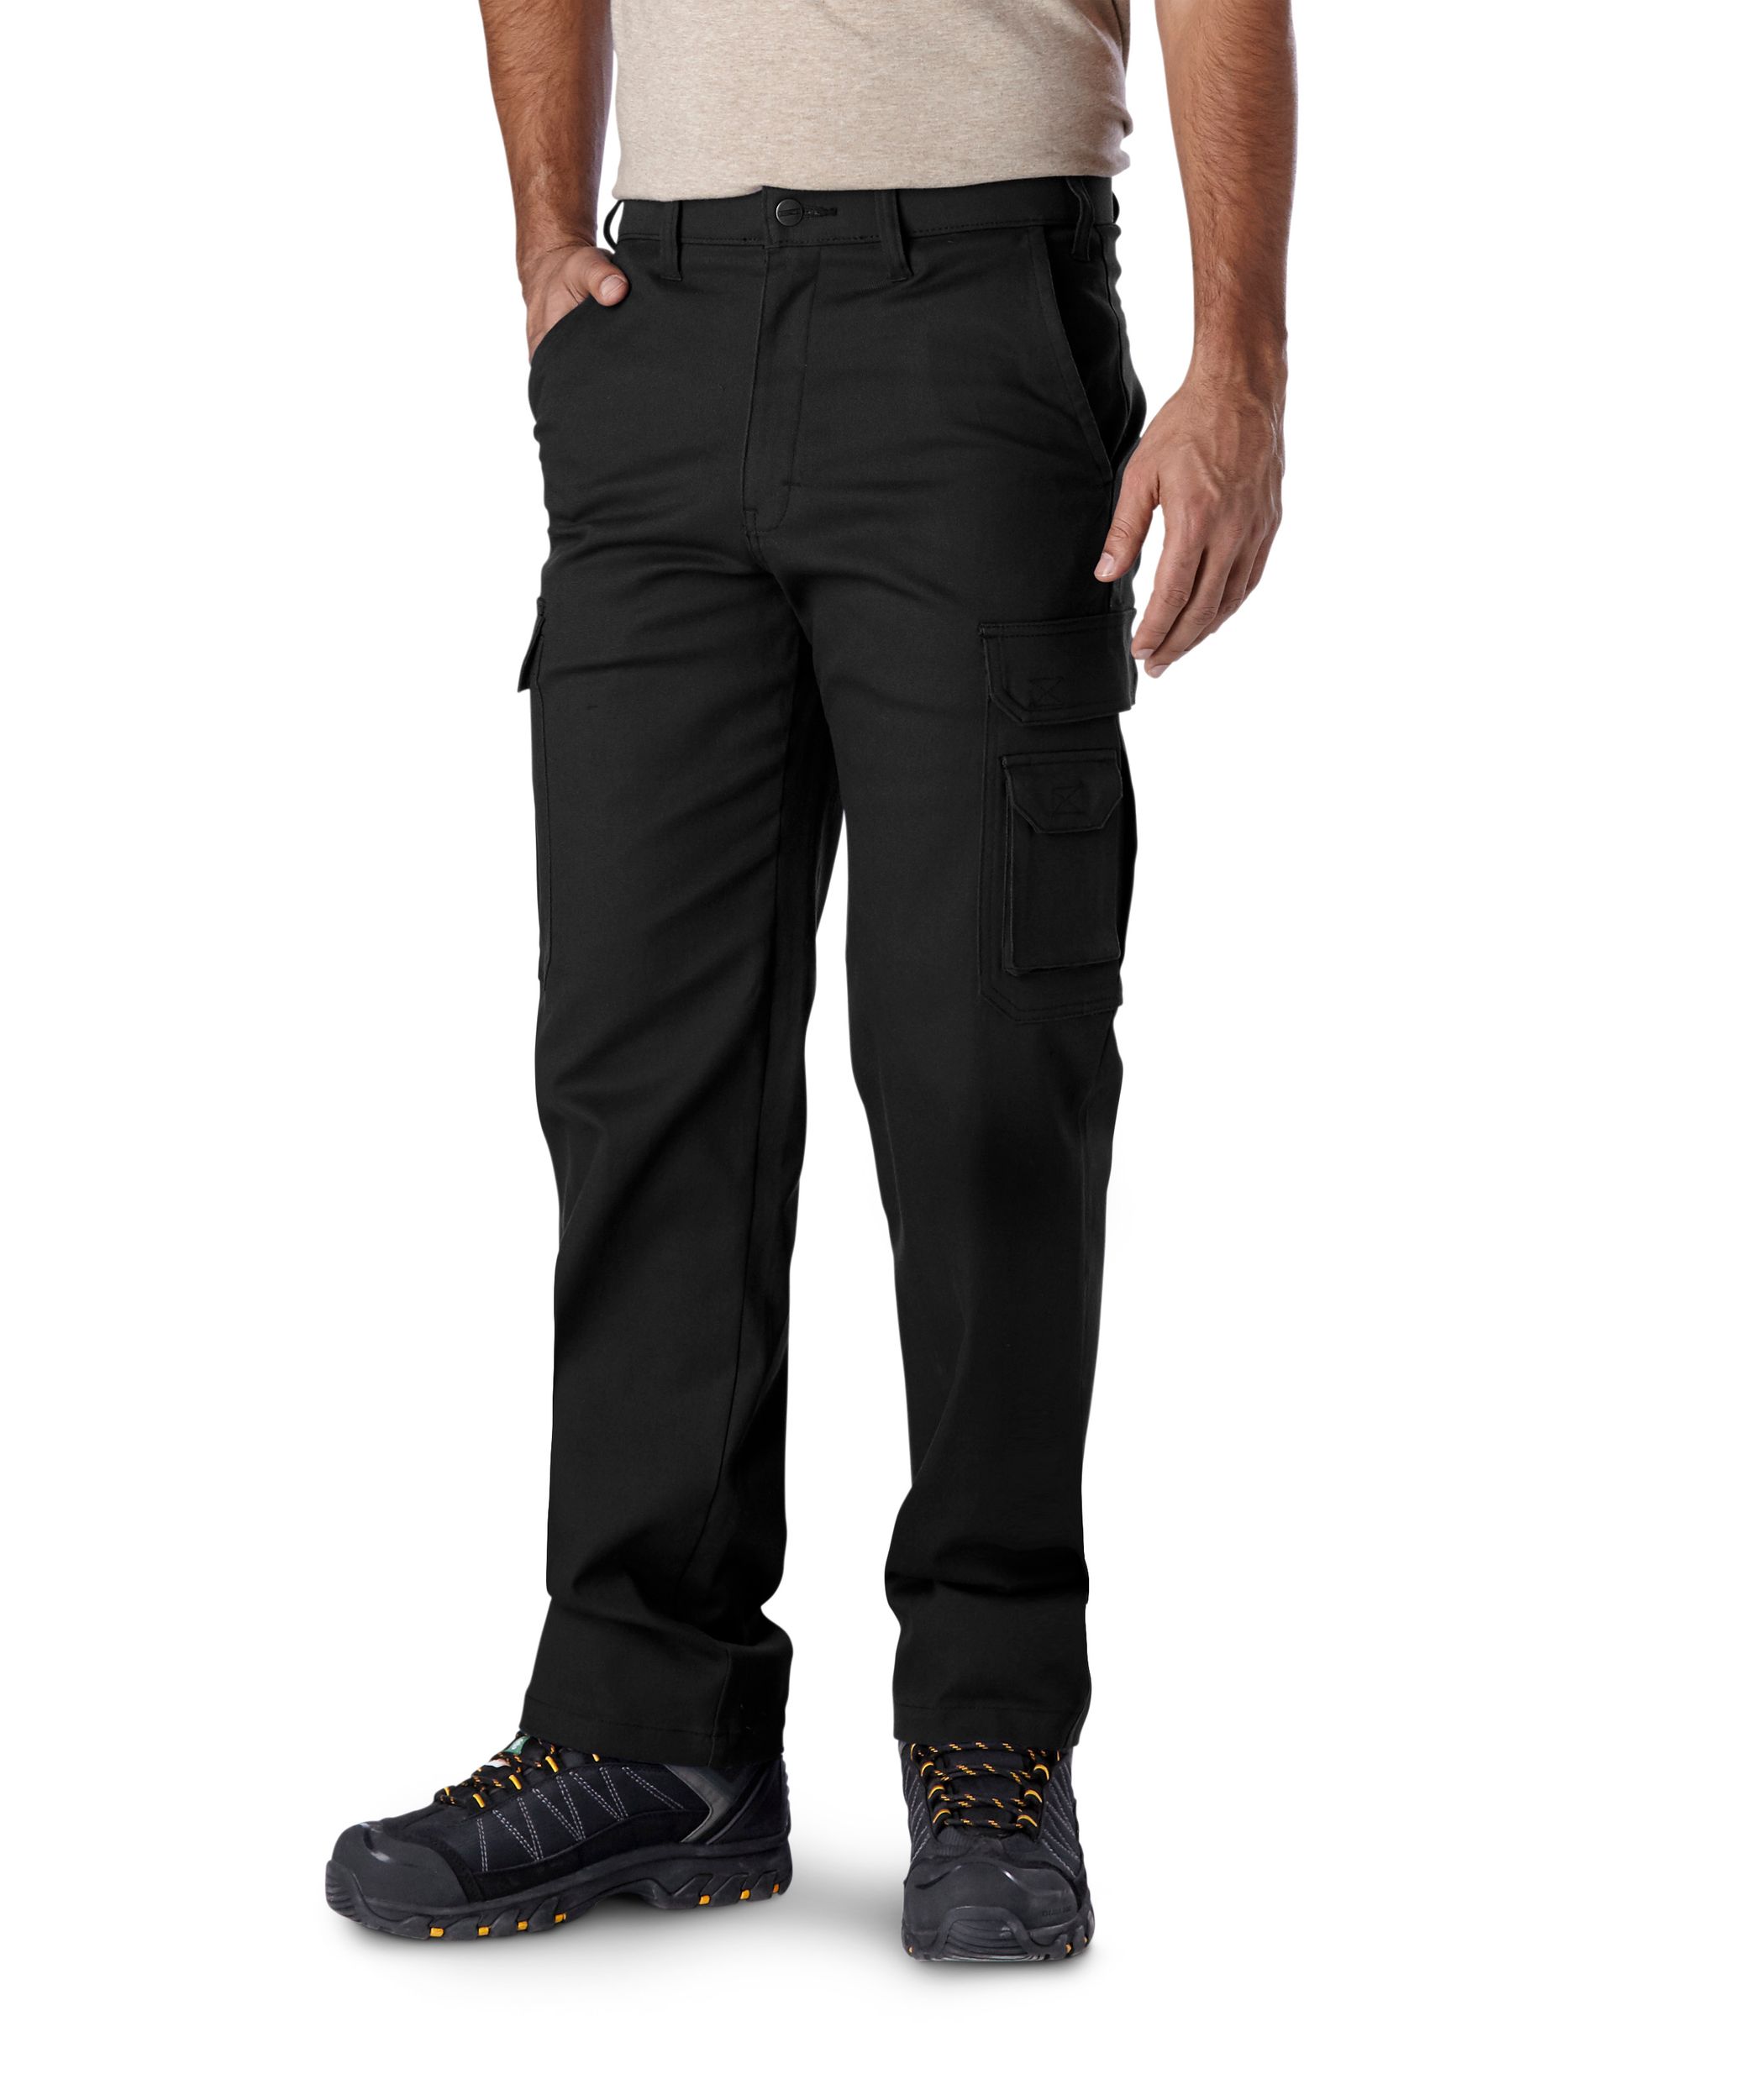 Buy Leather Trousers online India - Men | FASHIOLA.in